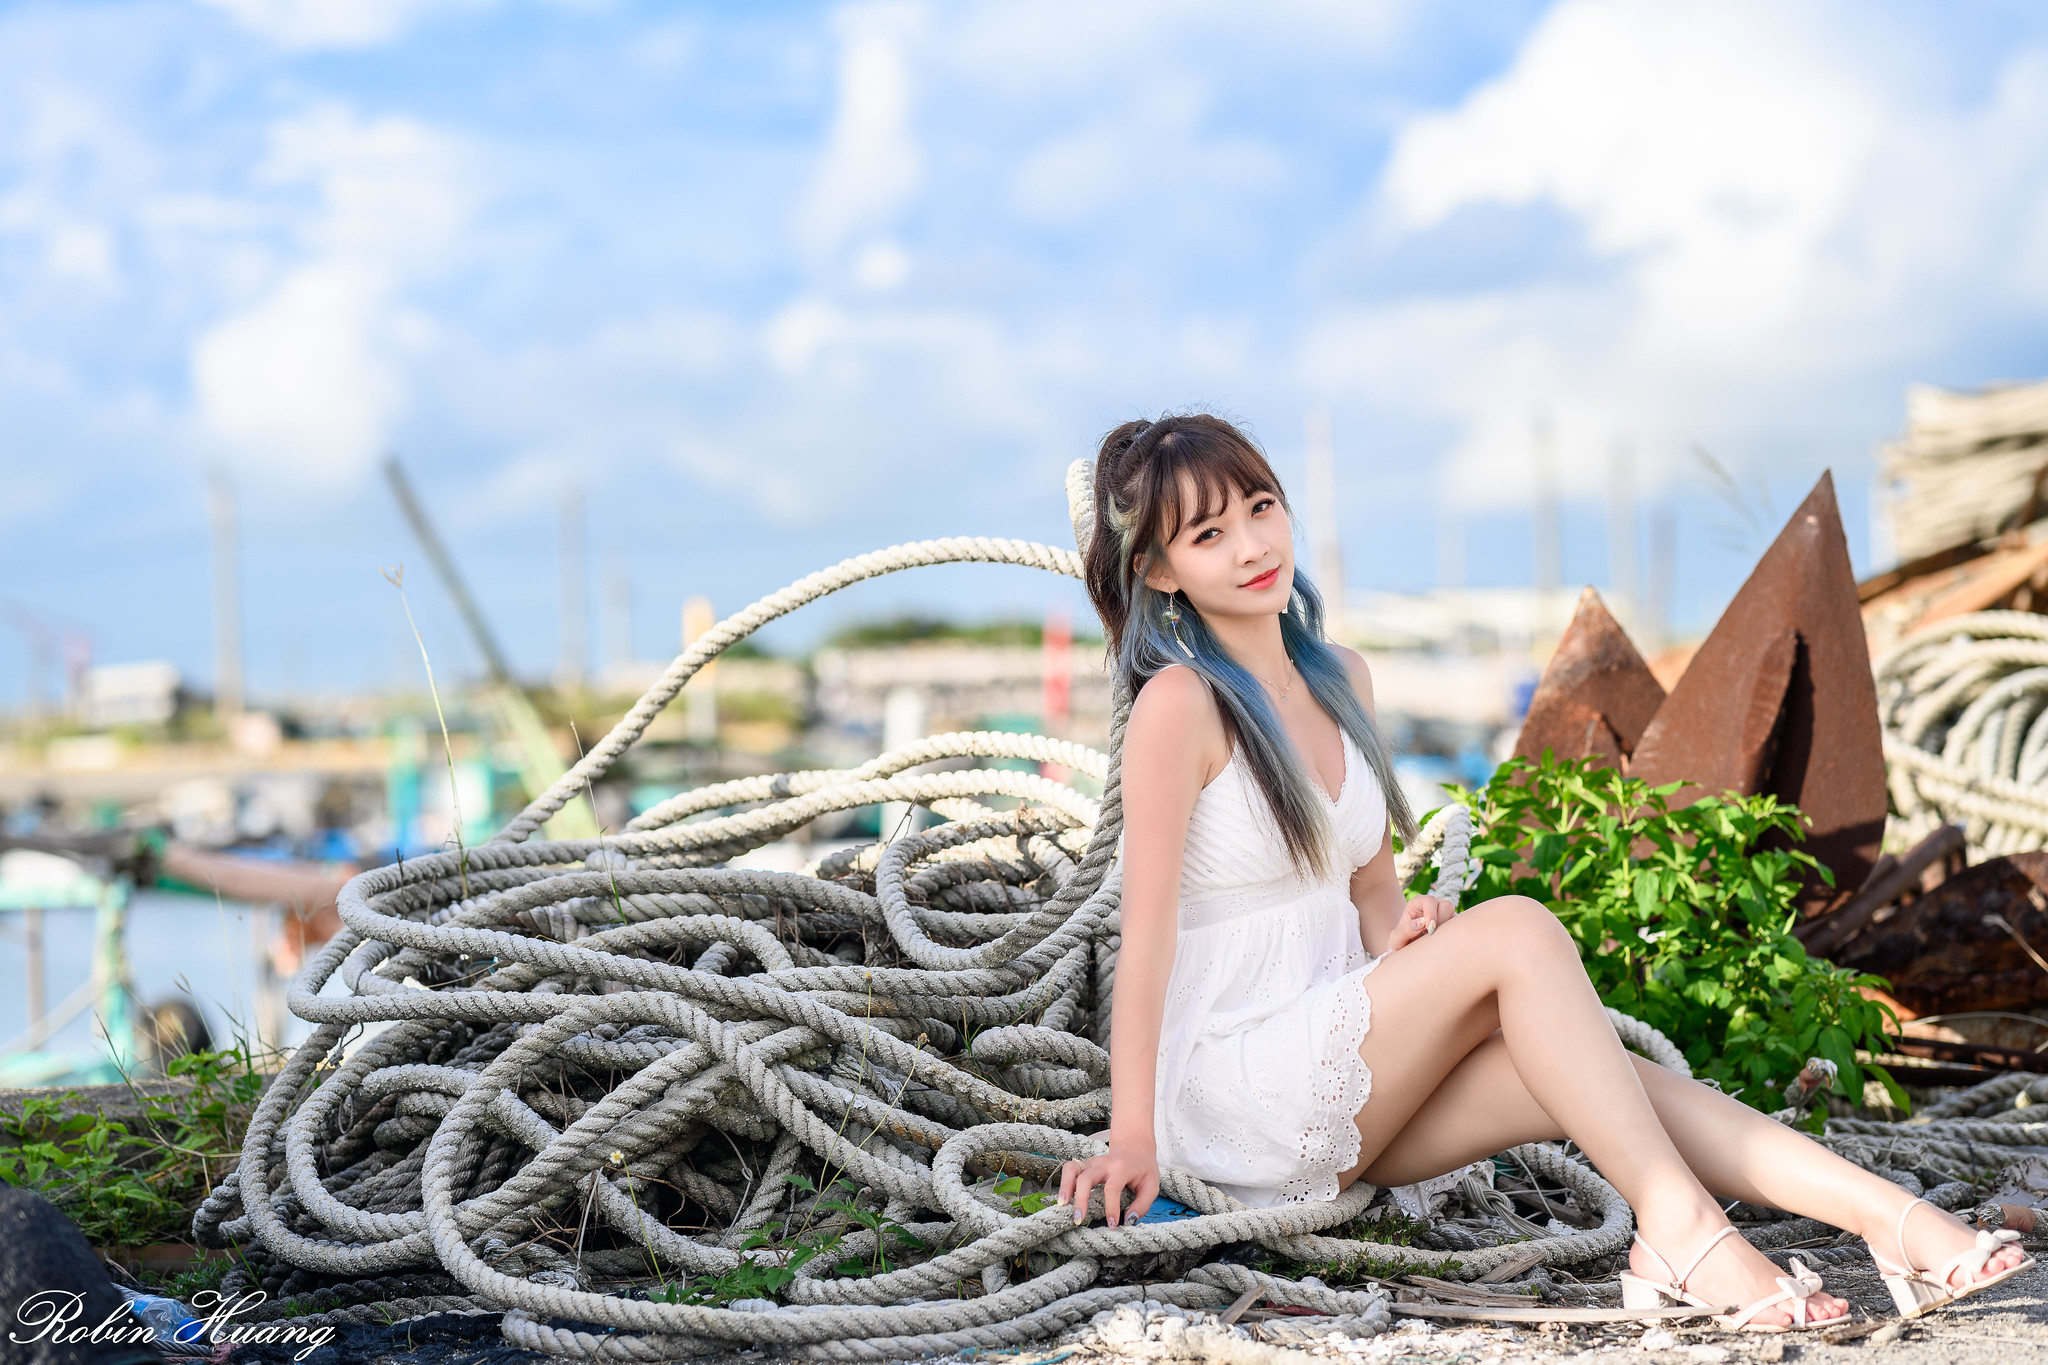 Robin Huang Women Asian Dyed Hair White Dress Ropes Outdoors 2048x1365